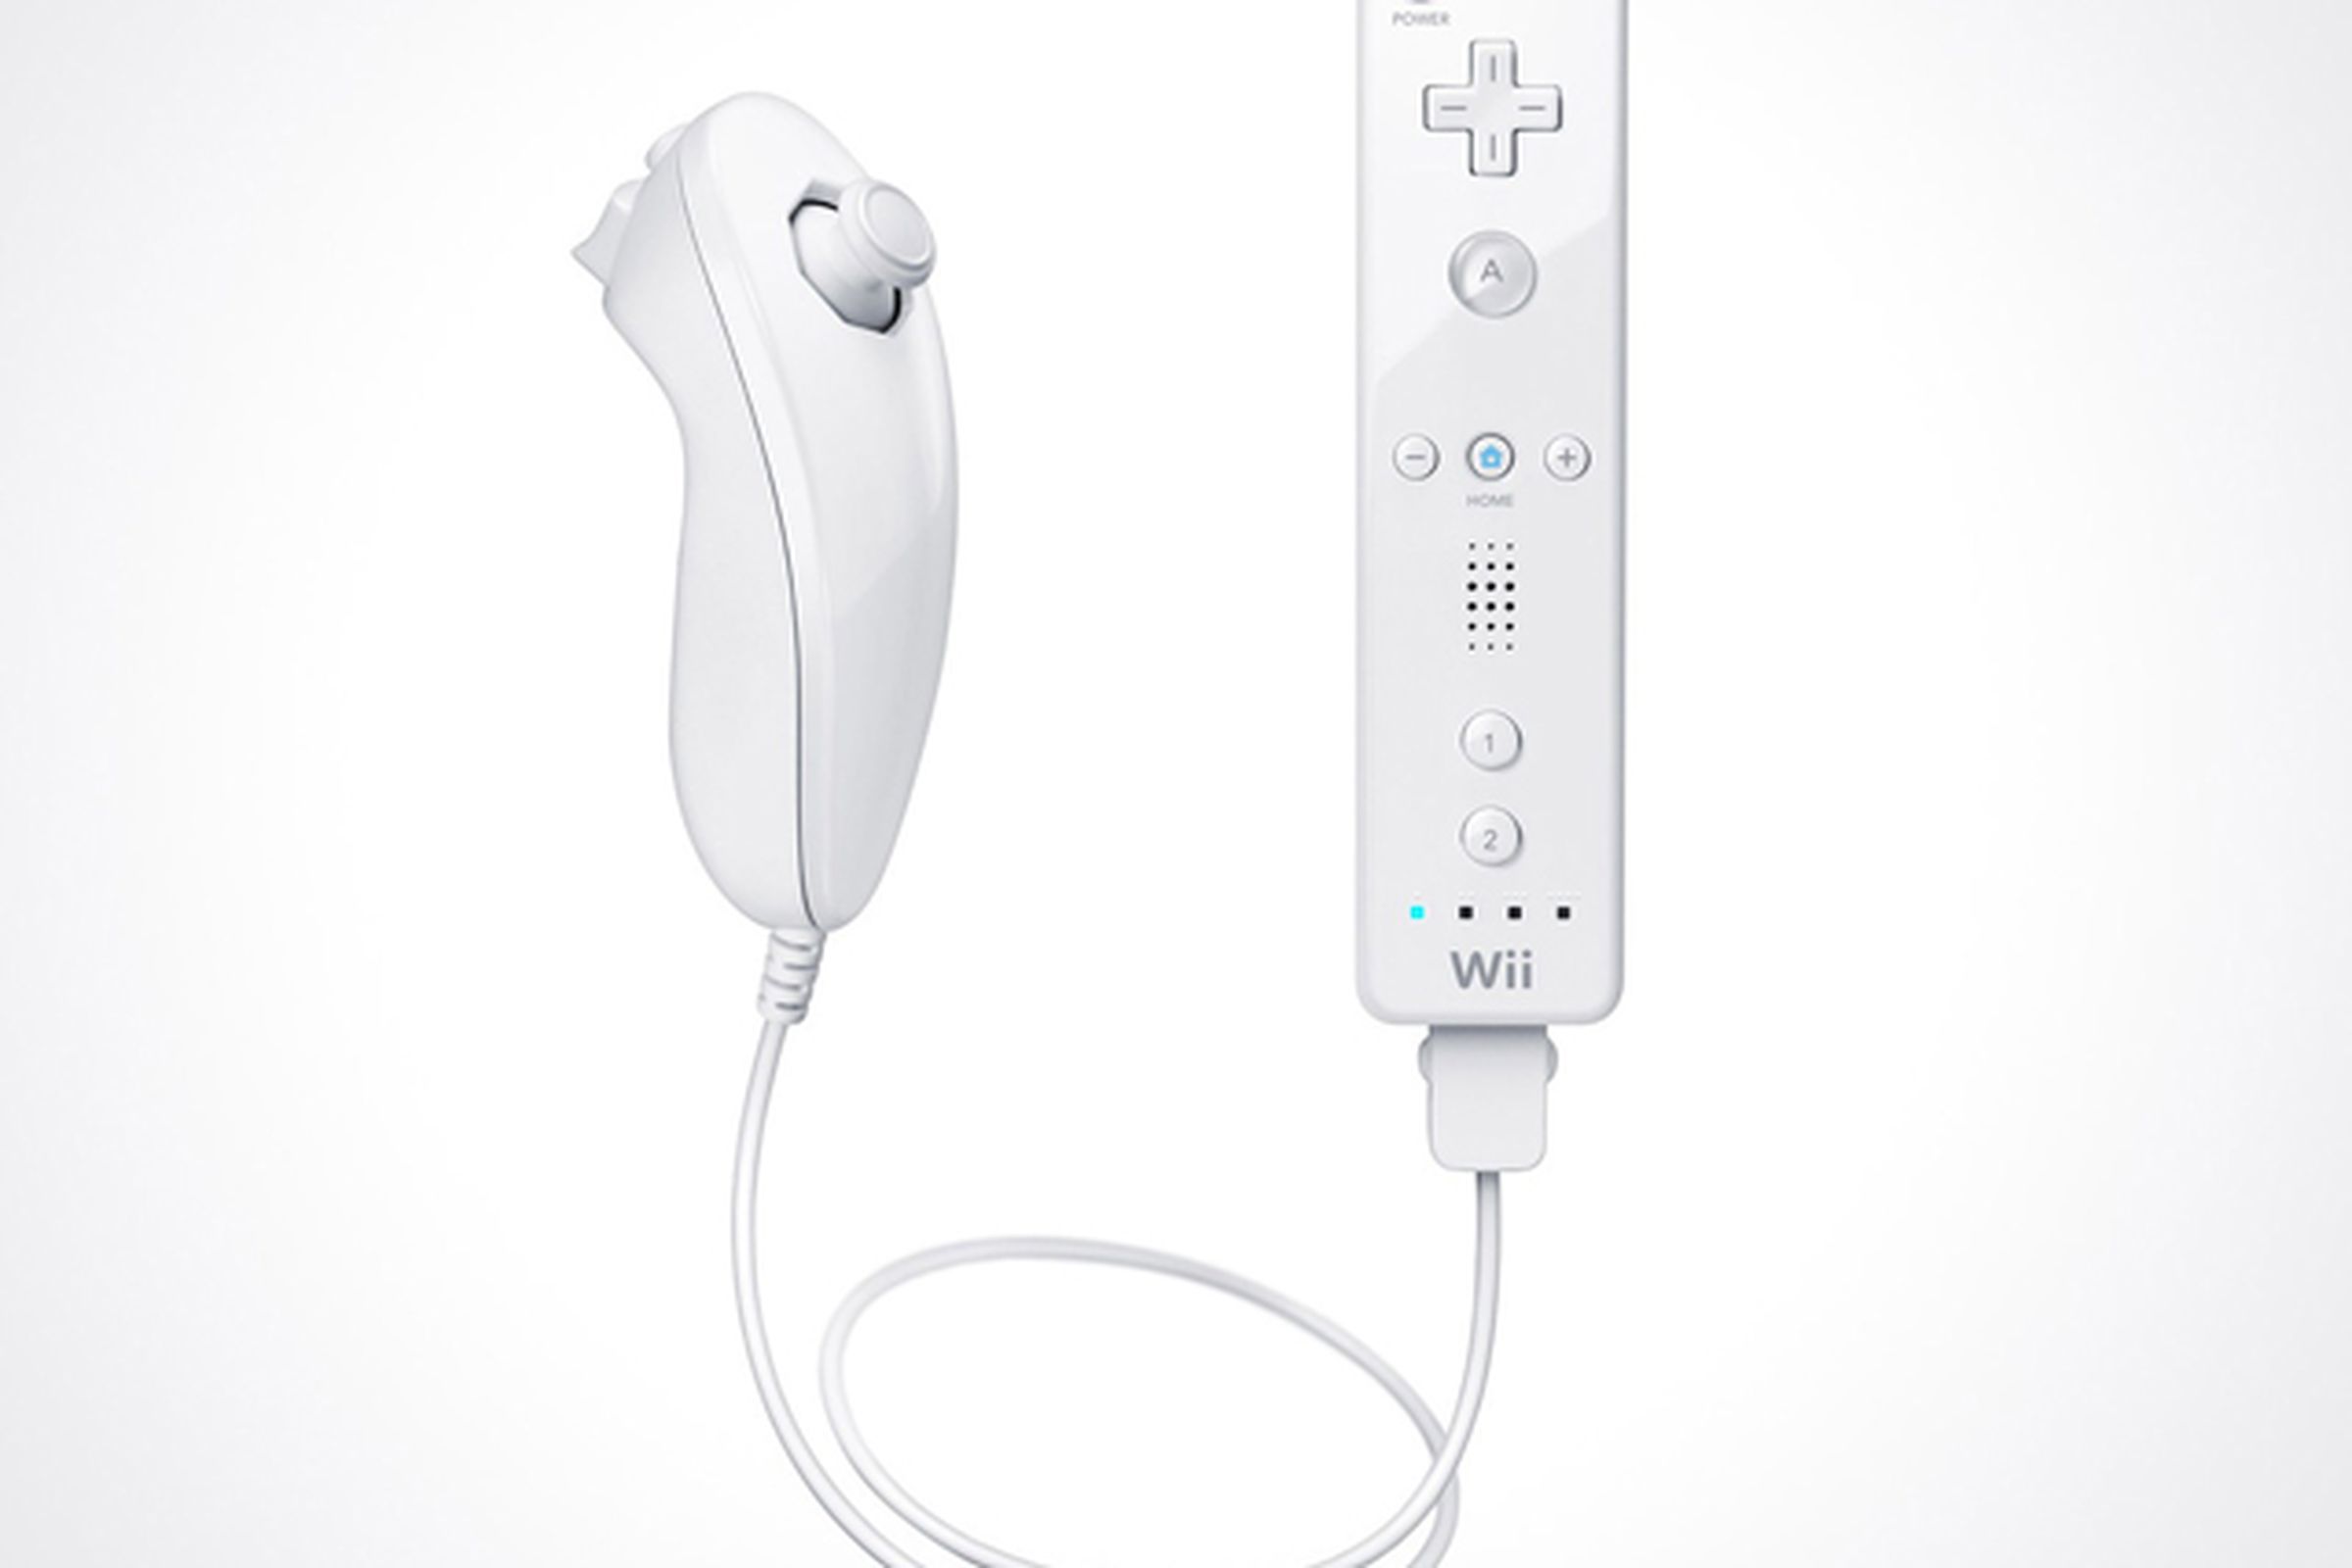 Wii Remote with Nunchuck Press Image 640